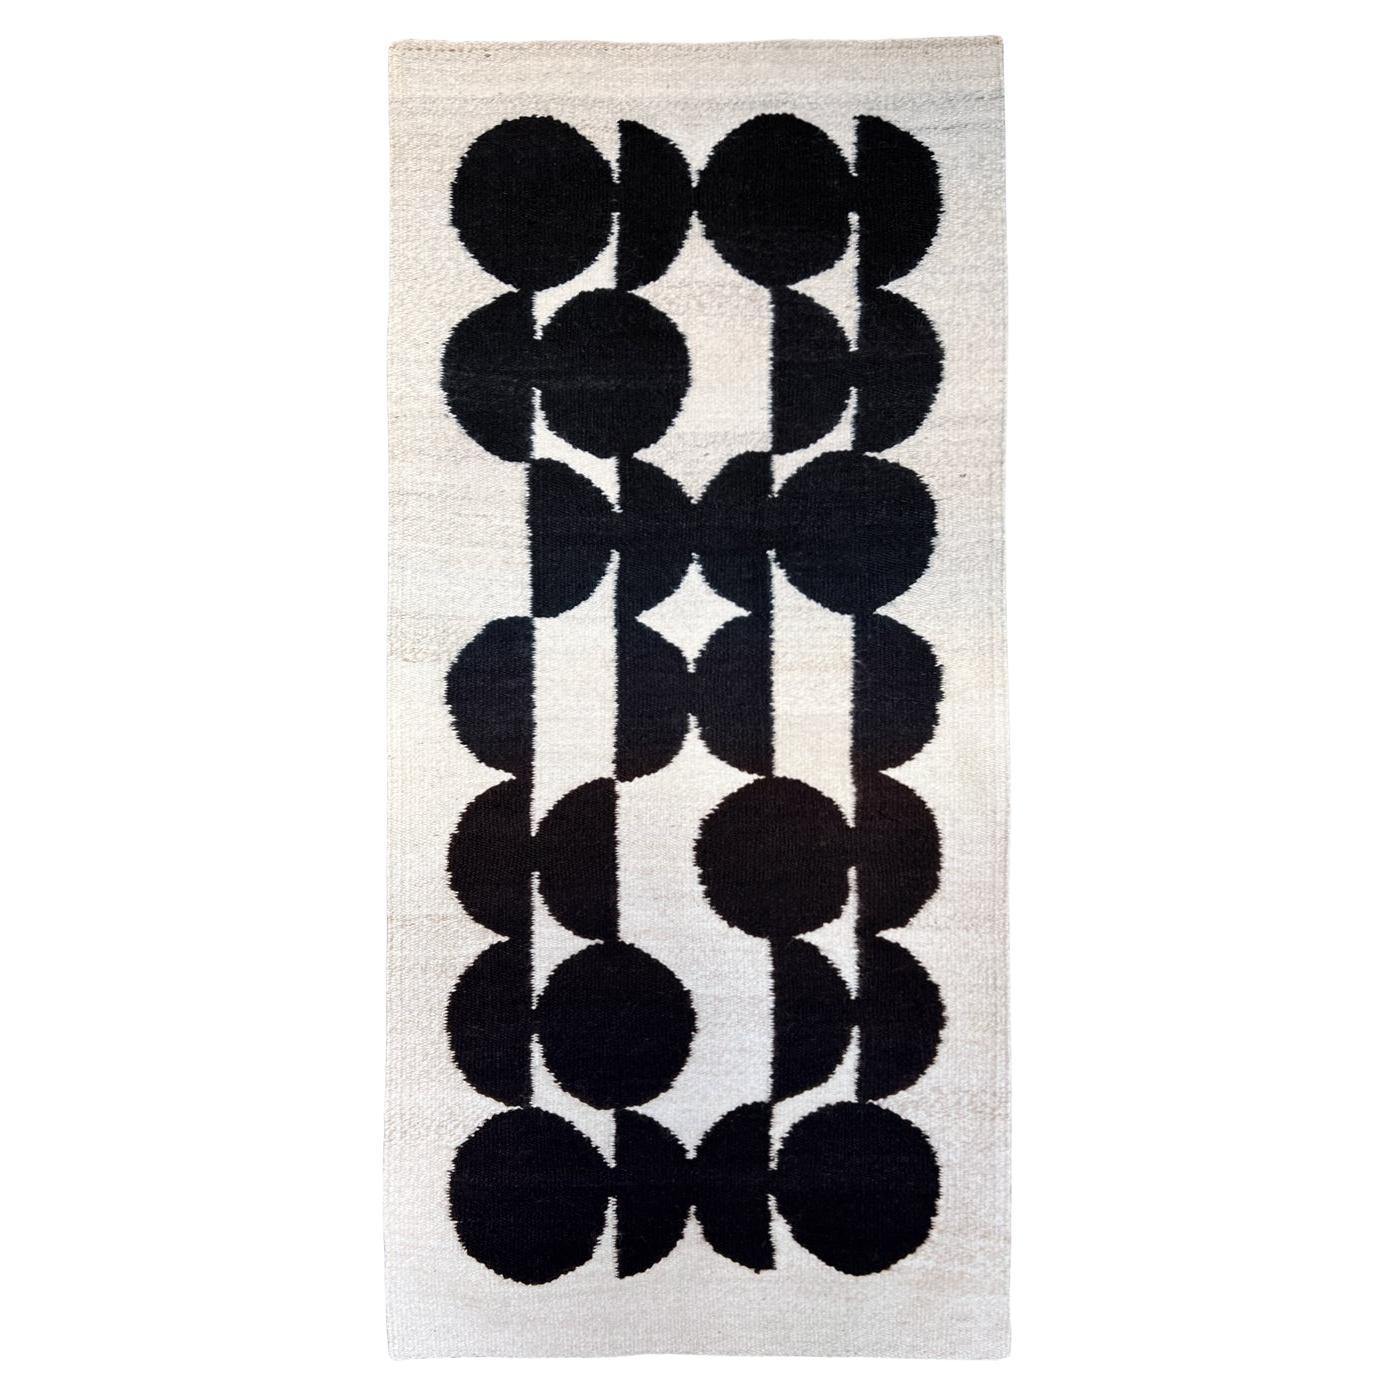 Hand-woven wool rug "Half-Moon" by Ary Brizzi For Sale